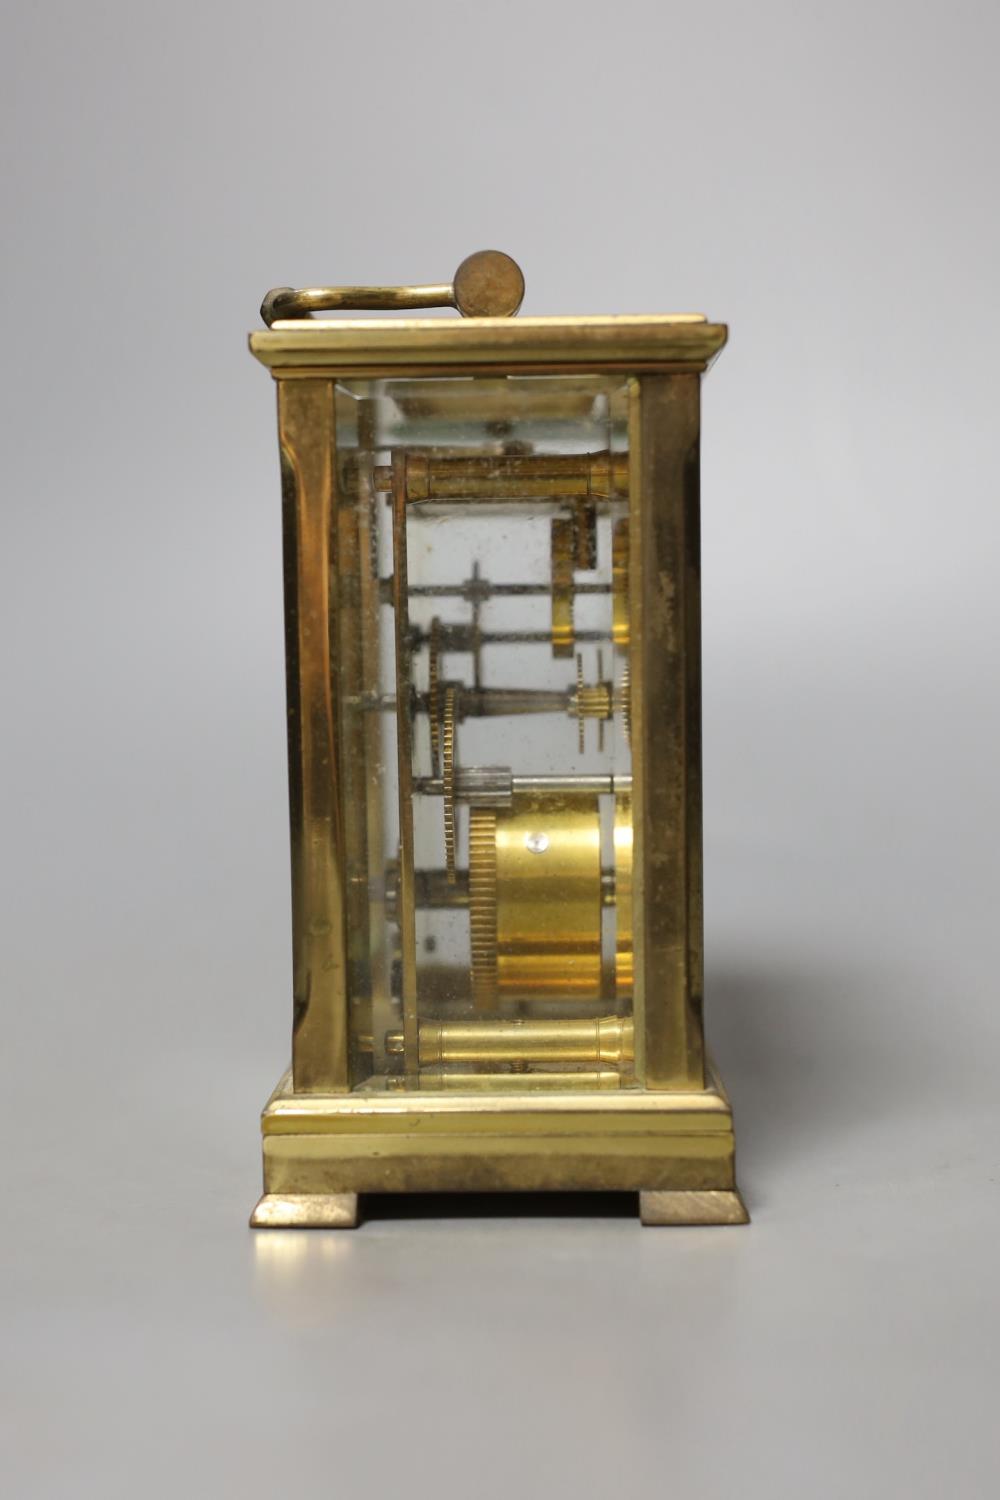 A Dent retailed brass carriage timepiece,12 cms high. - Image 4 of 5